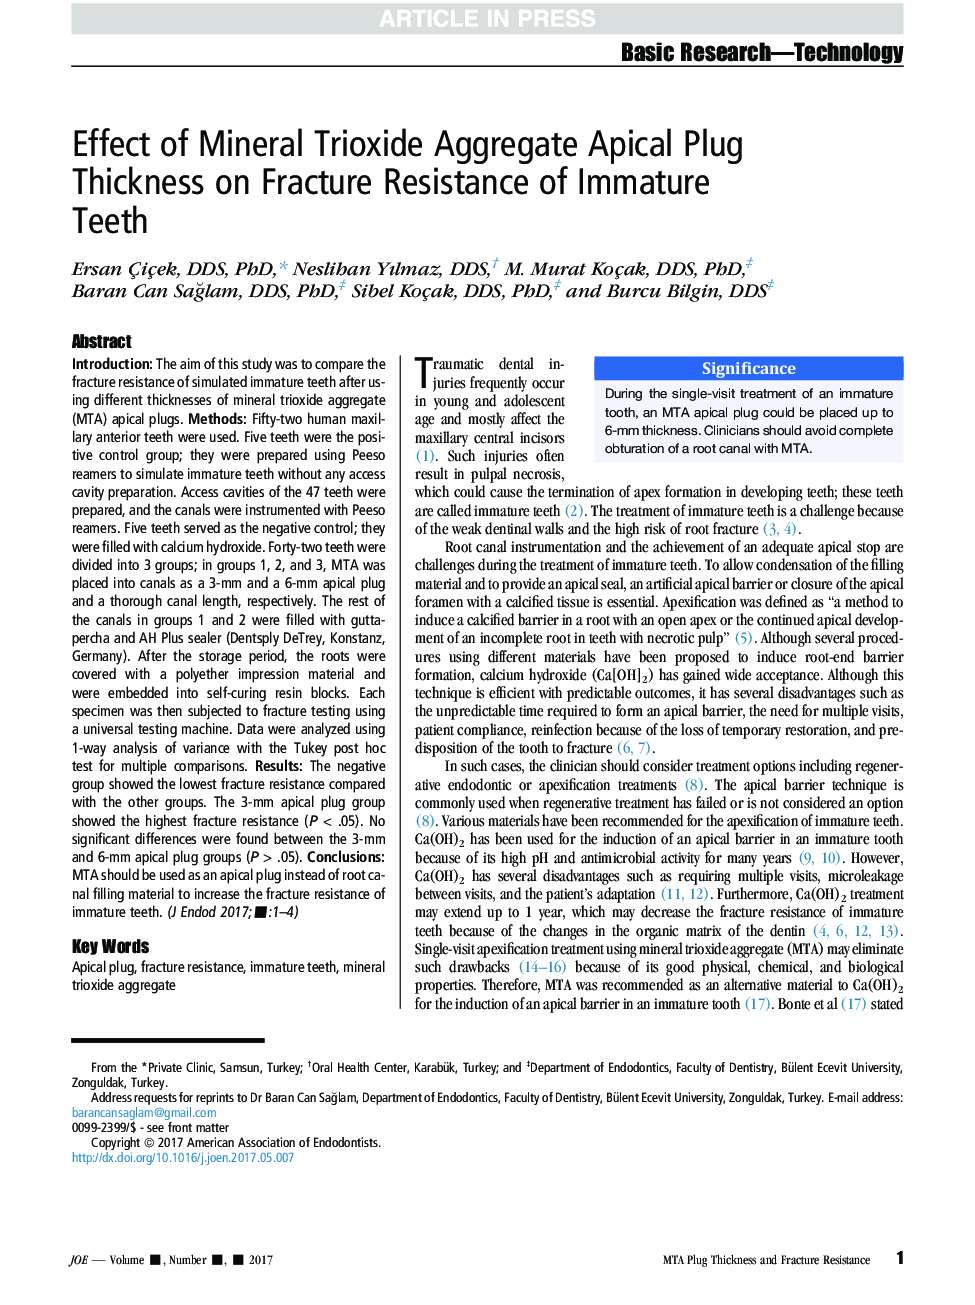 Effect of Mineral Trioxide Aggregate Apical Plug Thickness on Fracture Resistance of Immature Teeth